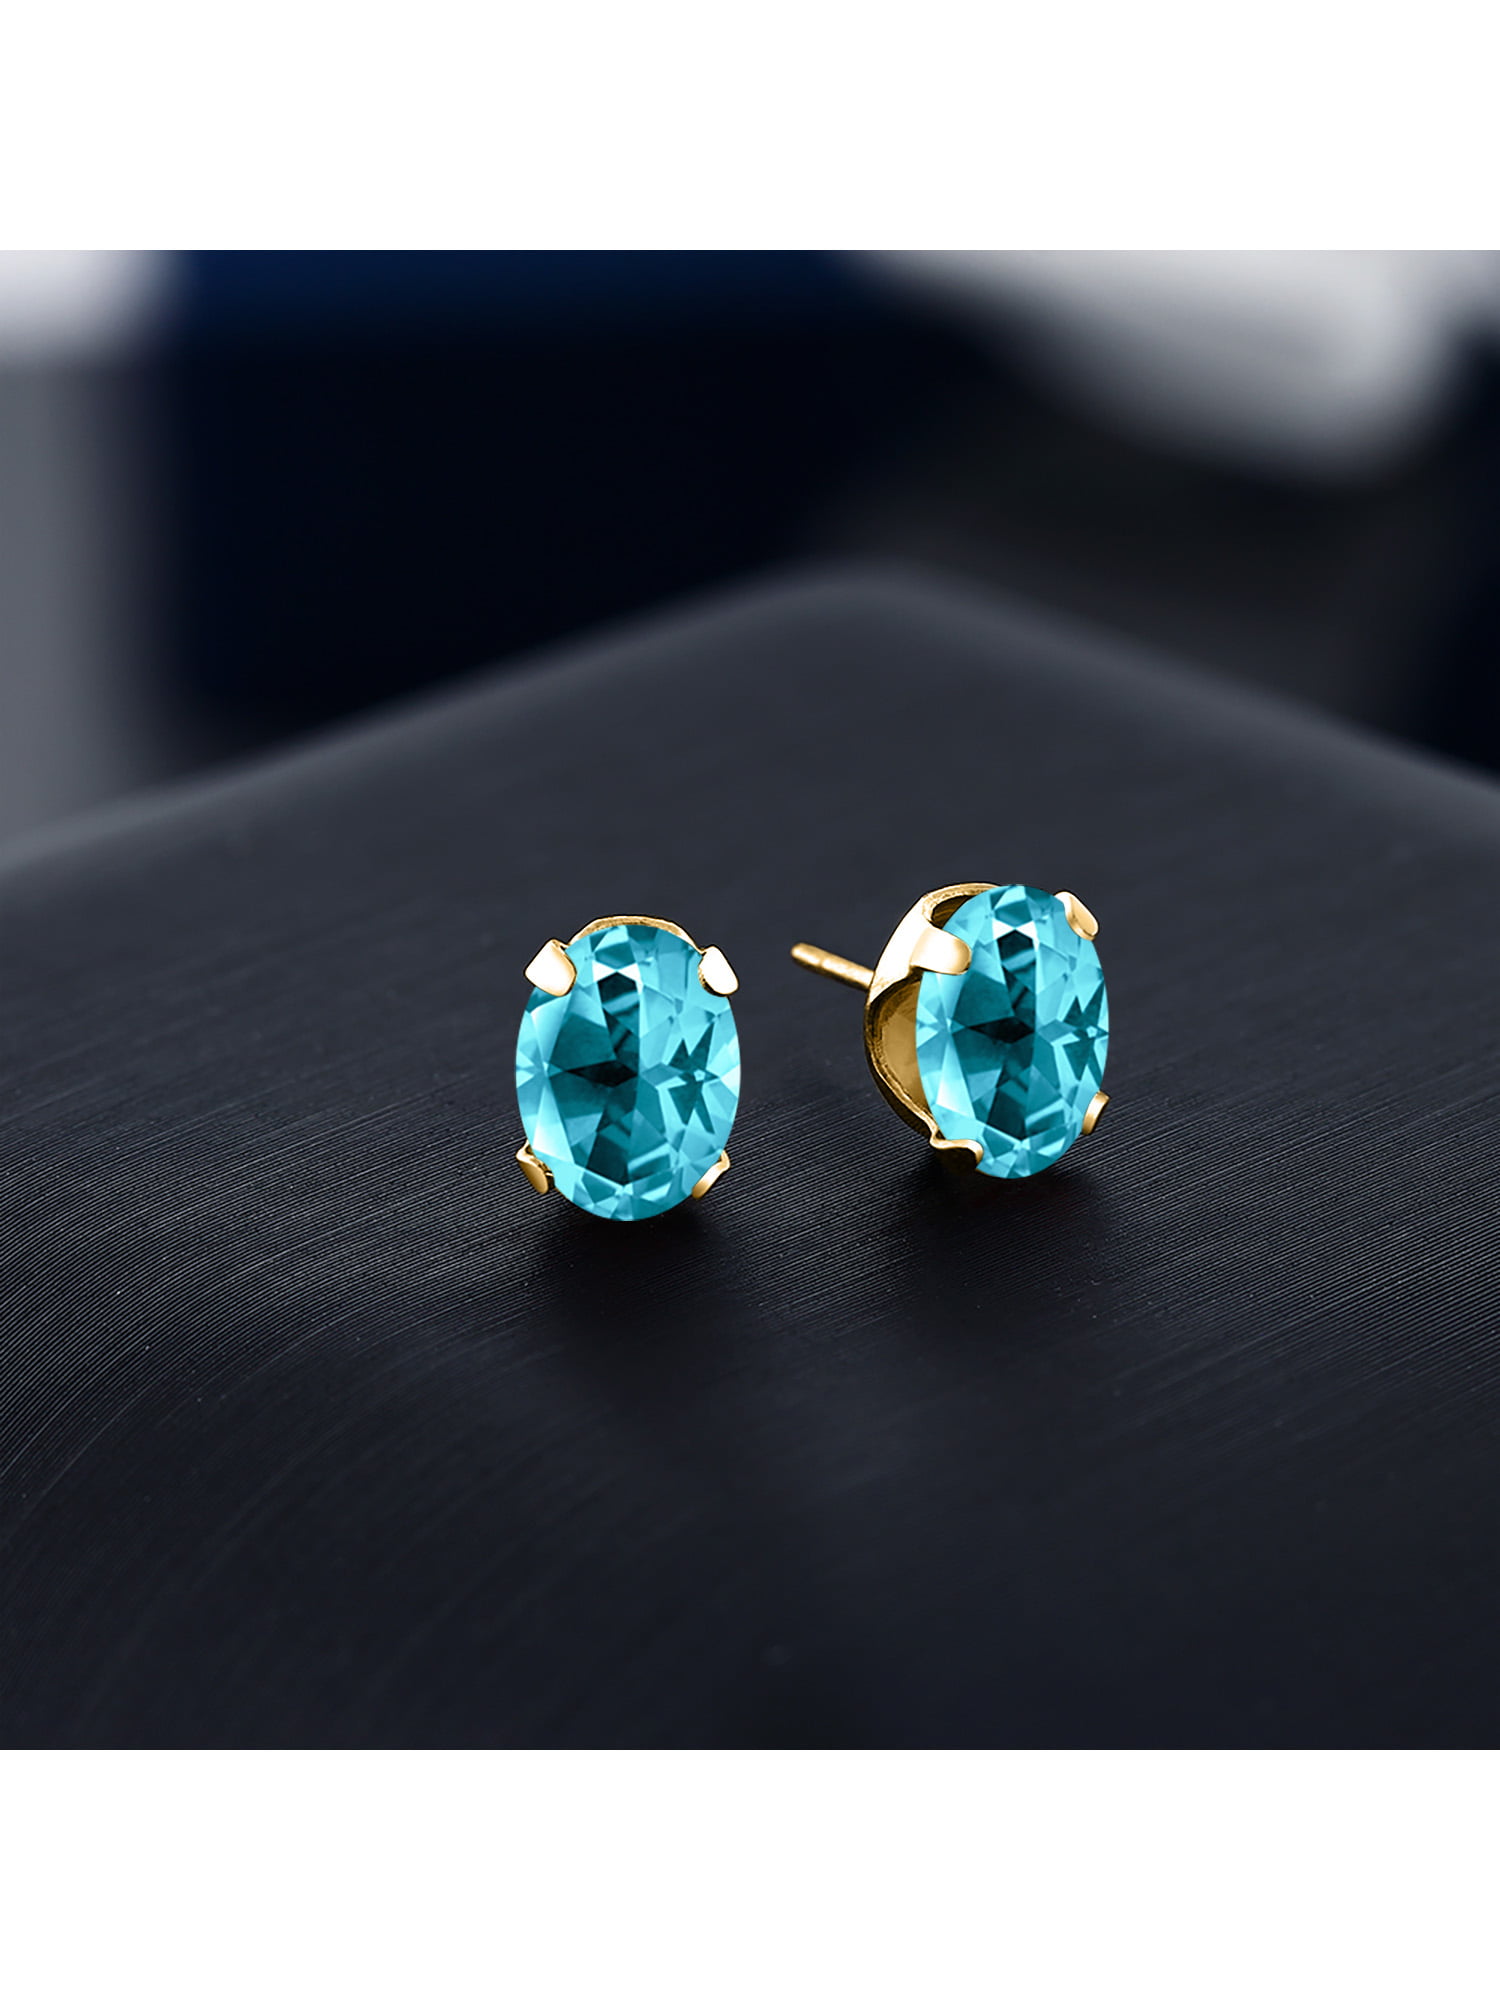 Gem Stone King 18K Yellow Gold Plated Silver Stud Earrings Set with Paraiba Topaz